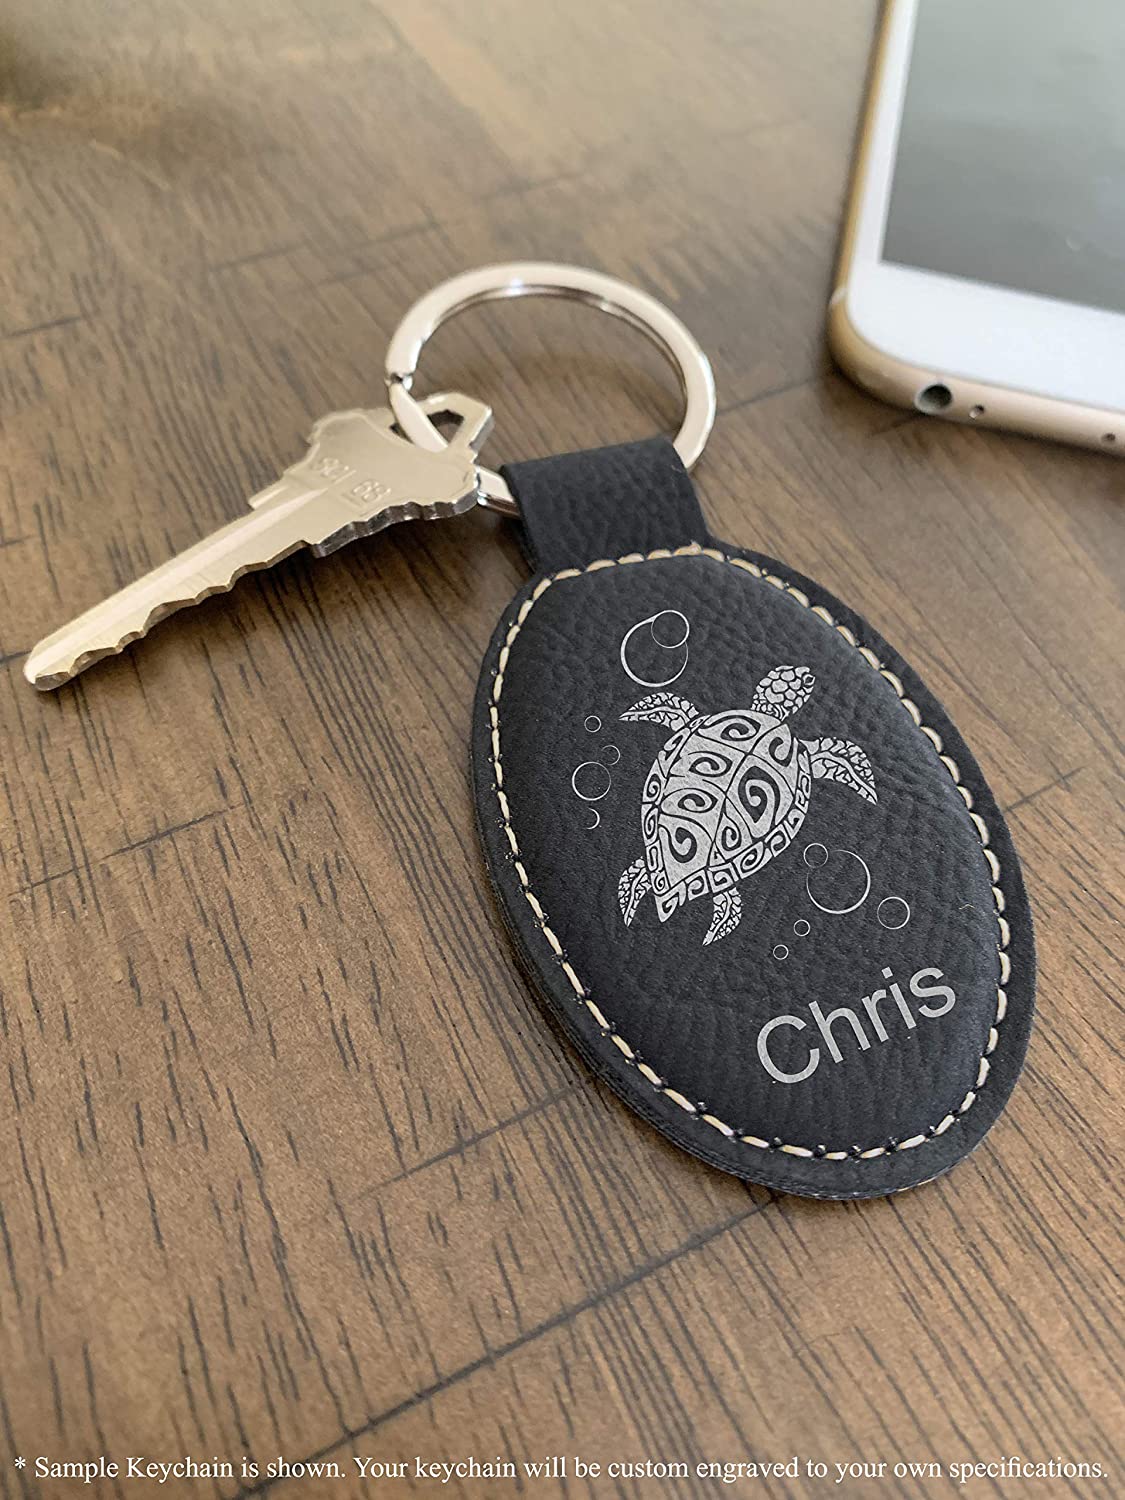 Faux Leather Oval Keychain, Class of 2020, 2021, 2022, 2023, 2024, 2025, Personalized Engraving Included